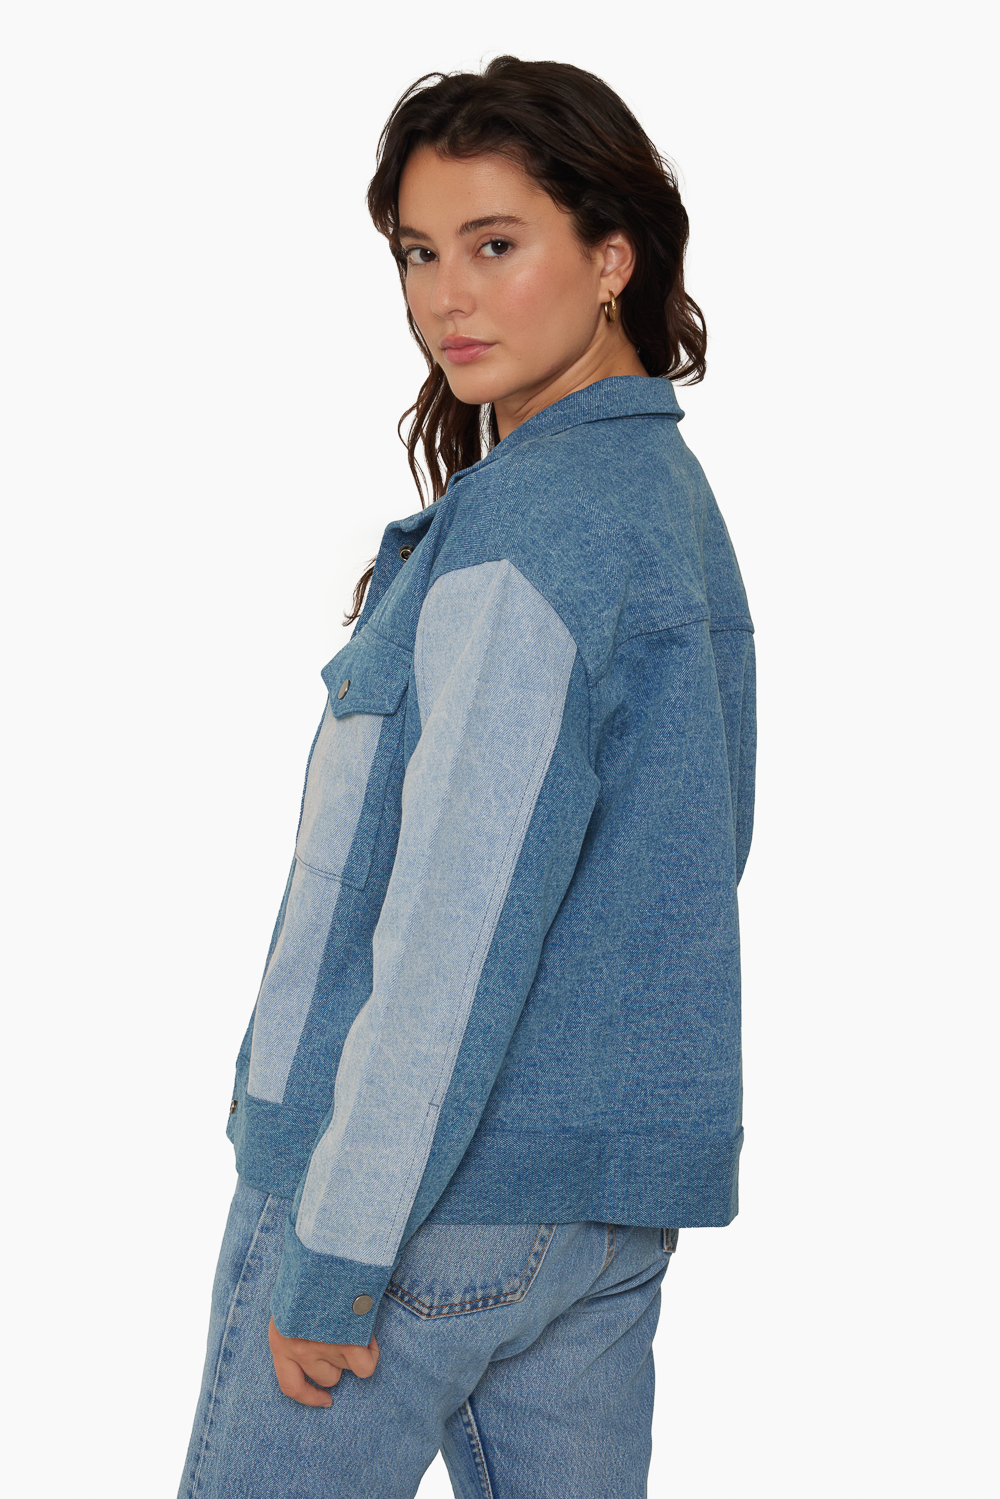 SET™ TWO TONED DENIM JACKET IN CLASSIC MID WASH